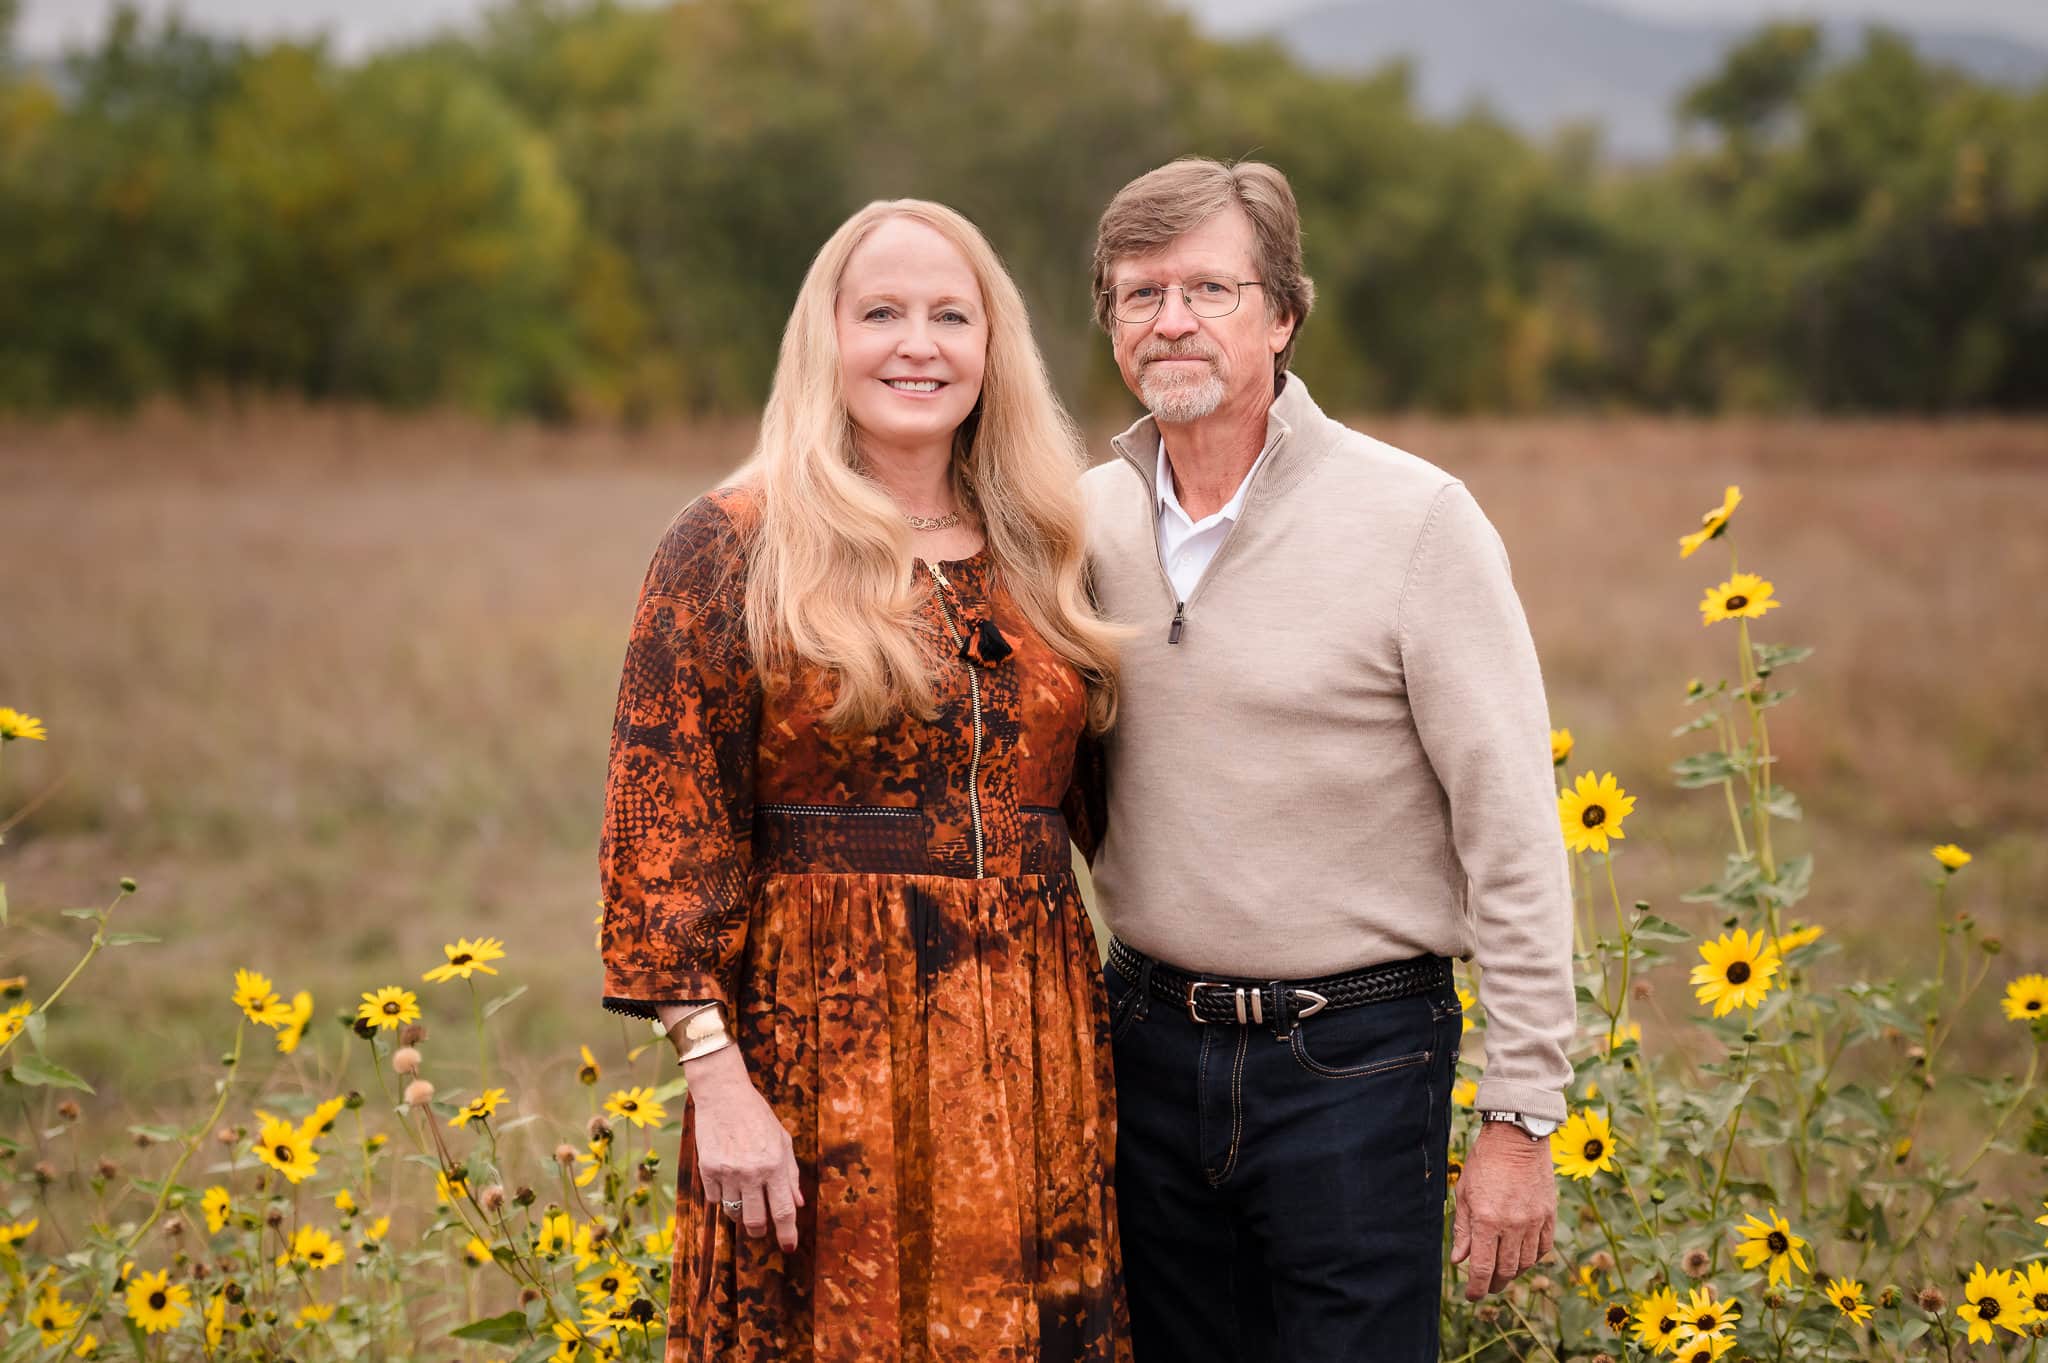 A man and woman celebrating their 40th anniversary pose for a photo amid the wild sunflowers outside of Sweet Heart Winery in Loveland, CO.